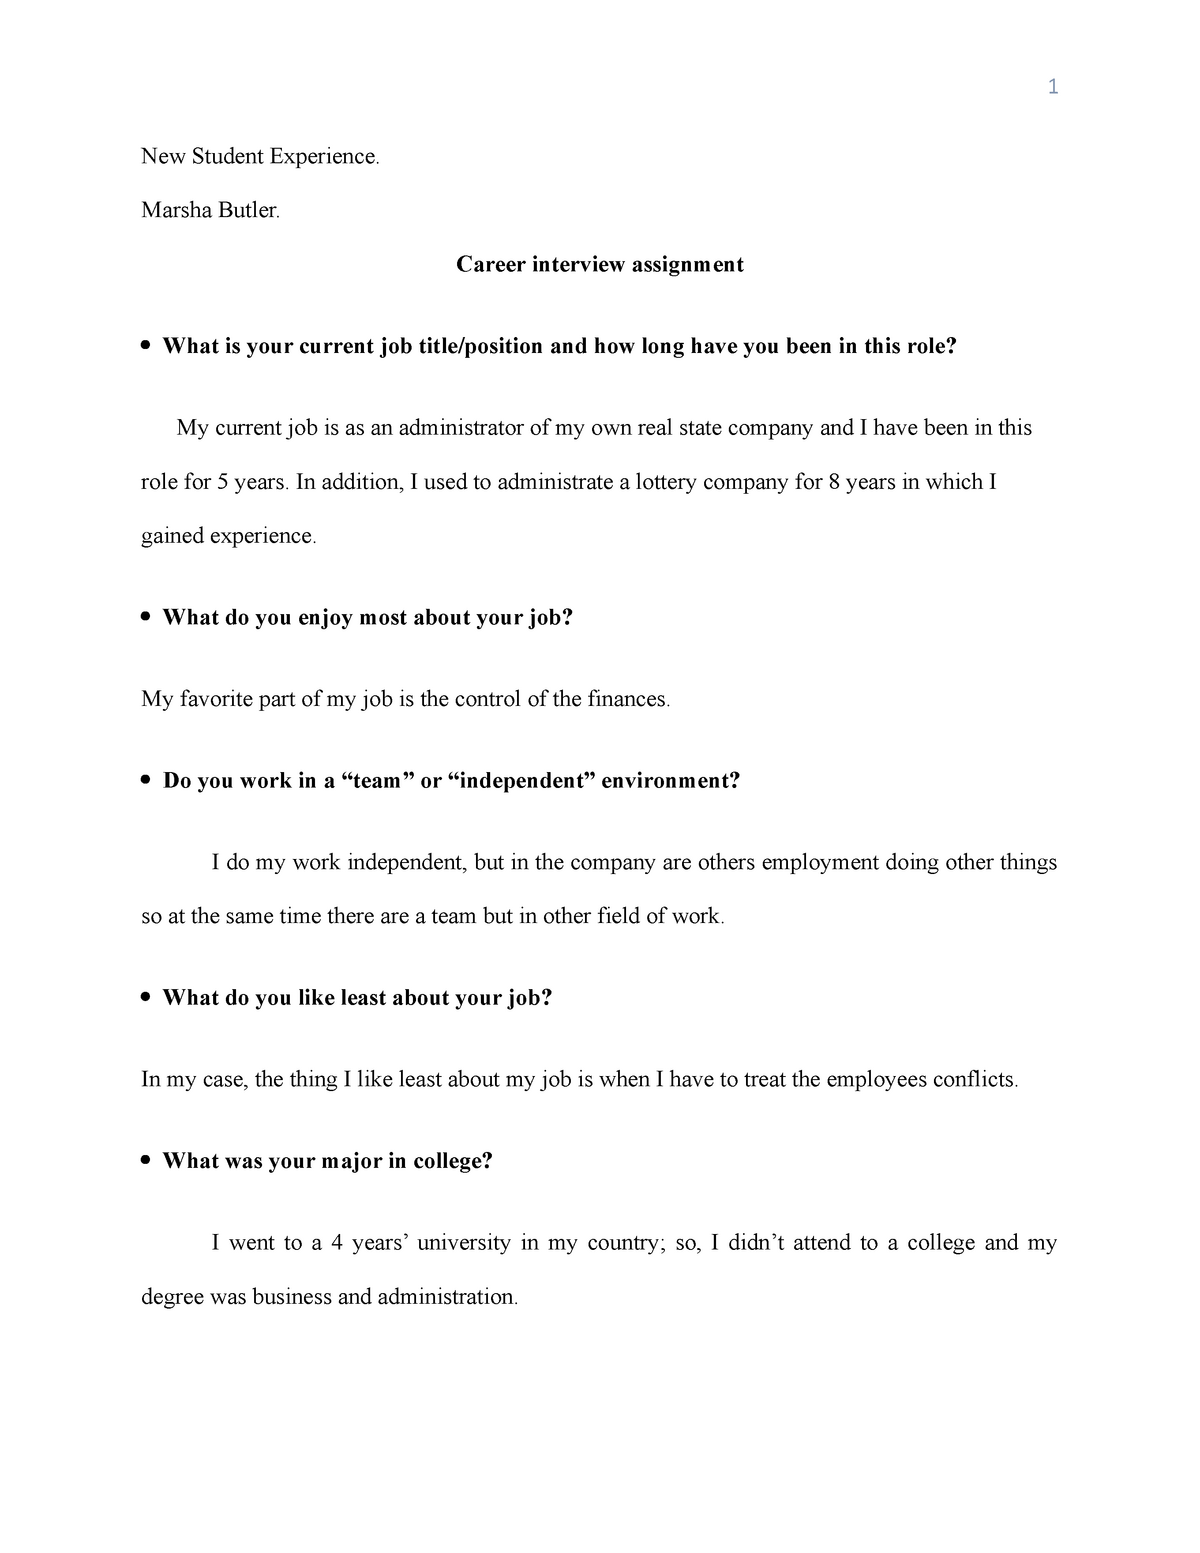 historical interview assignment